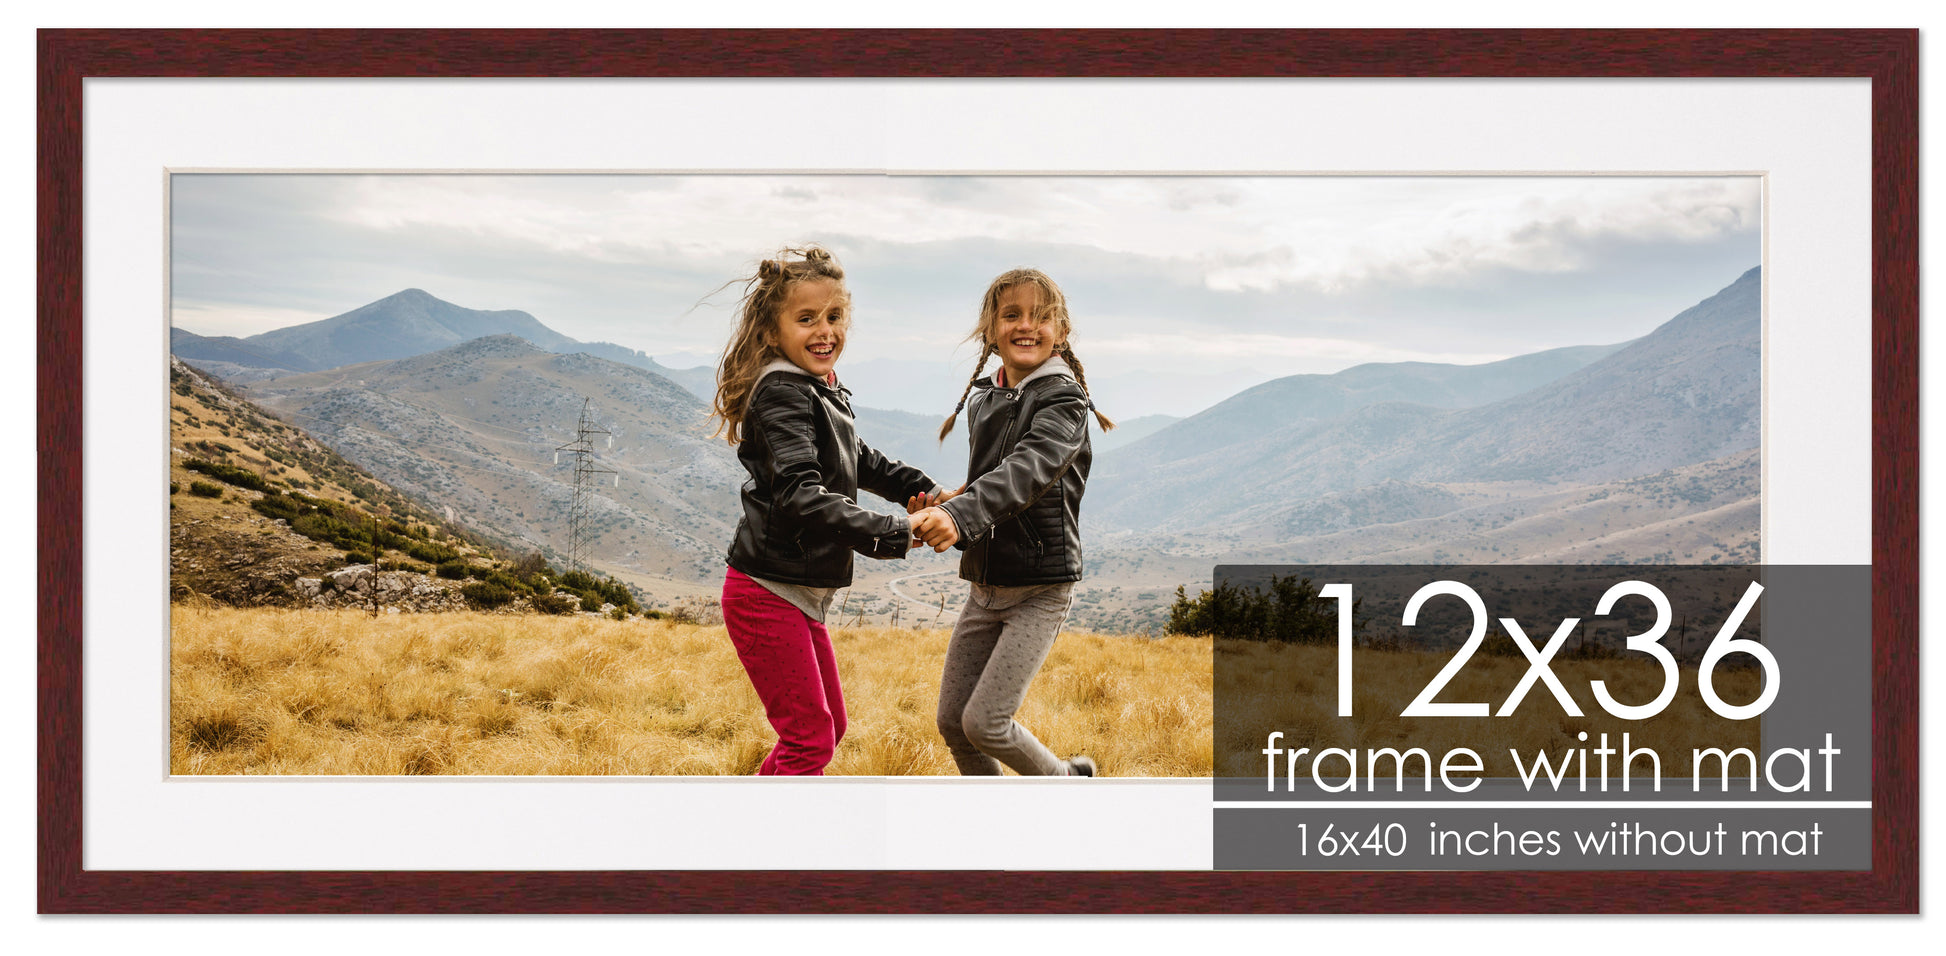 20x20 Frame with Mat - Black 22X22 Frame Wood Made to Display Print or Poster Measuring 20 x 20 Inches with White Photo Mat